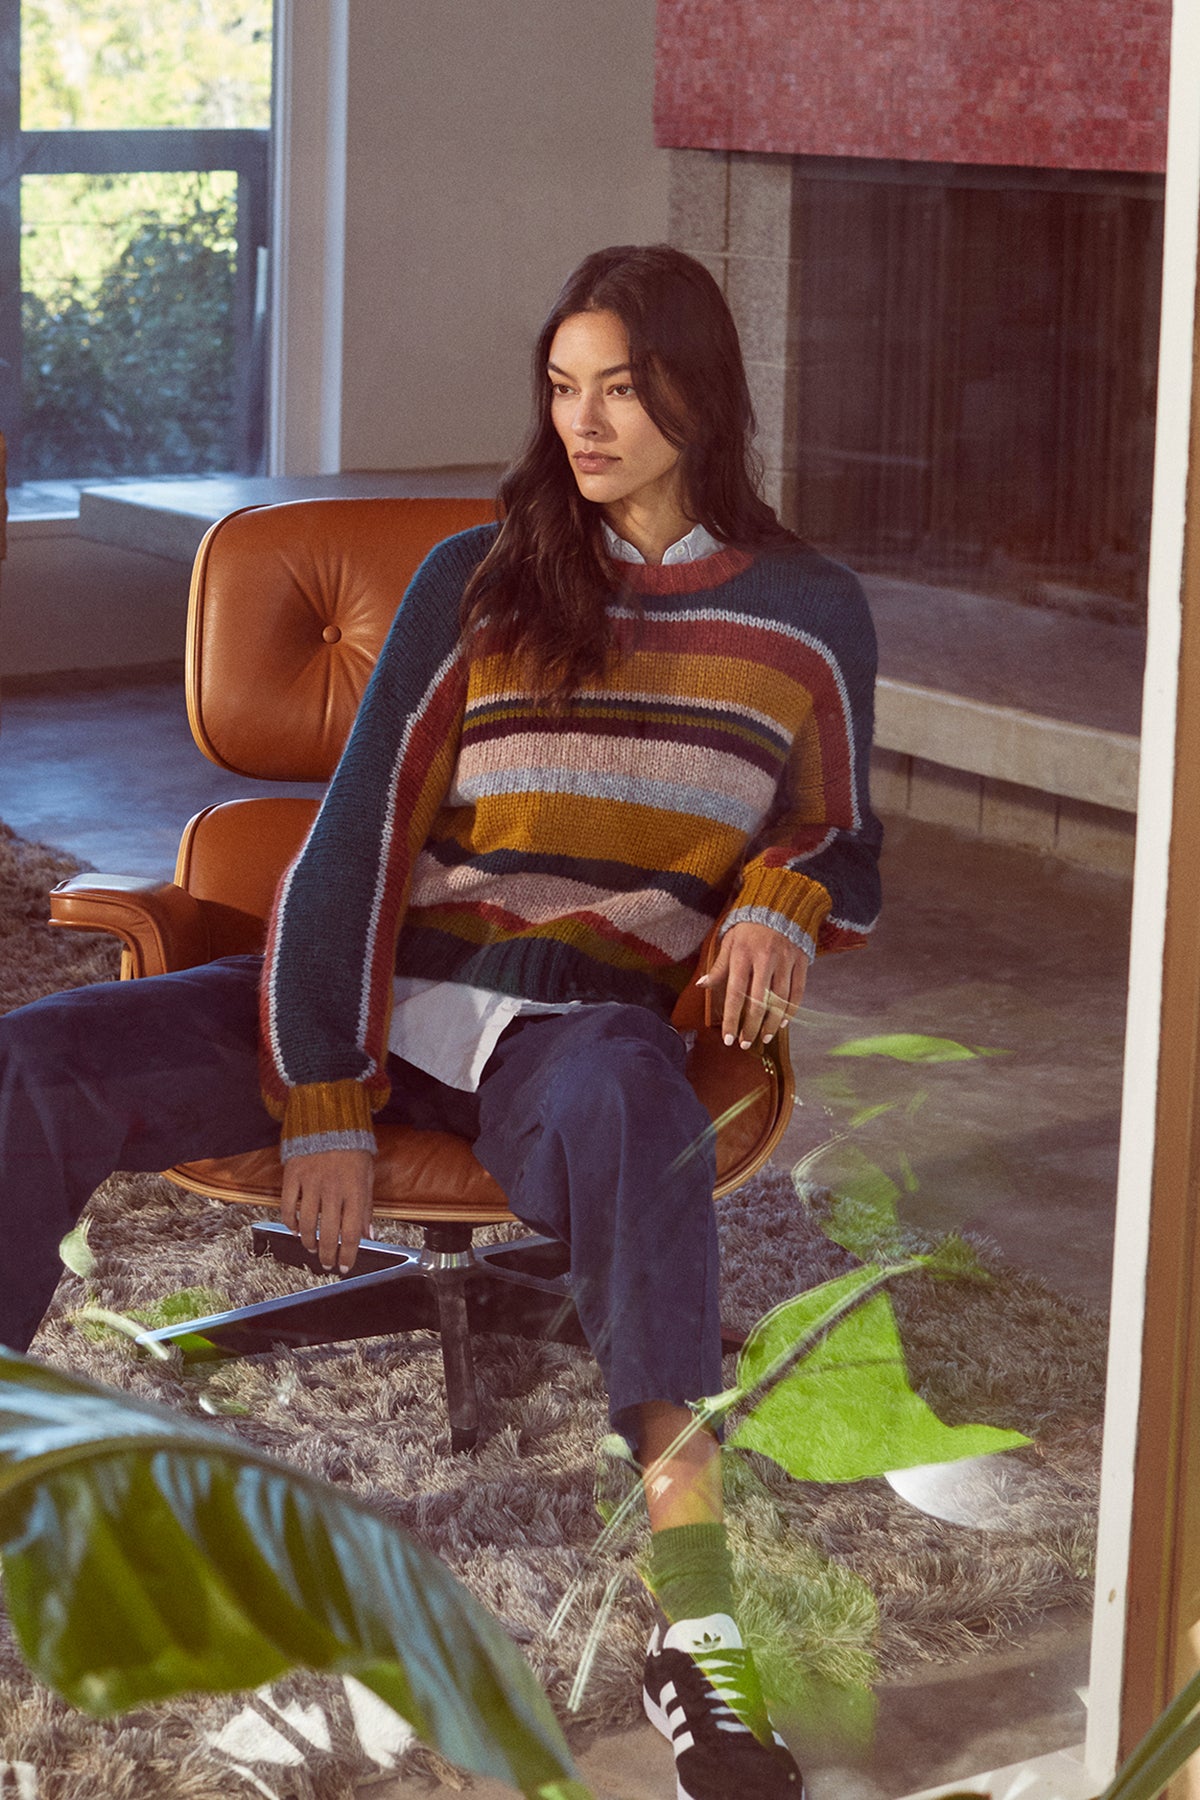 A woman sitting on a cozy chair in a living room wearing the Velvet by Graham & Spencer SAMARA STRIPED CREW NECK SWEATER.-35230329241793